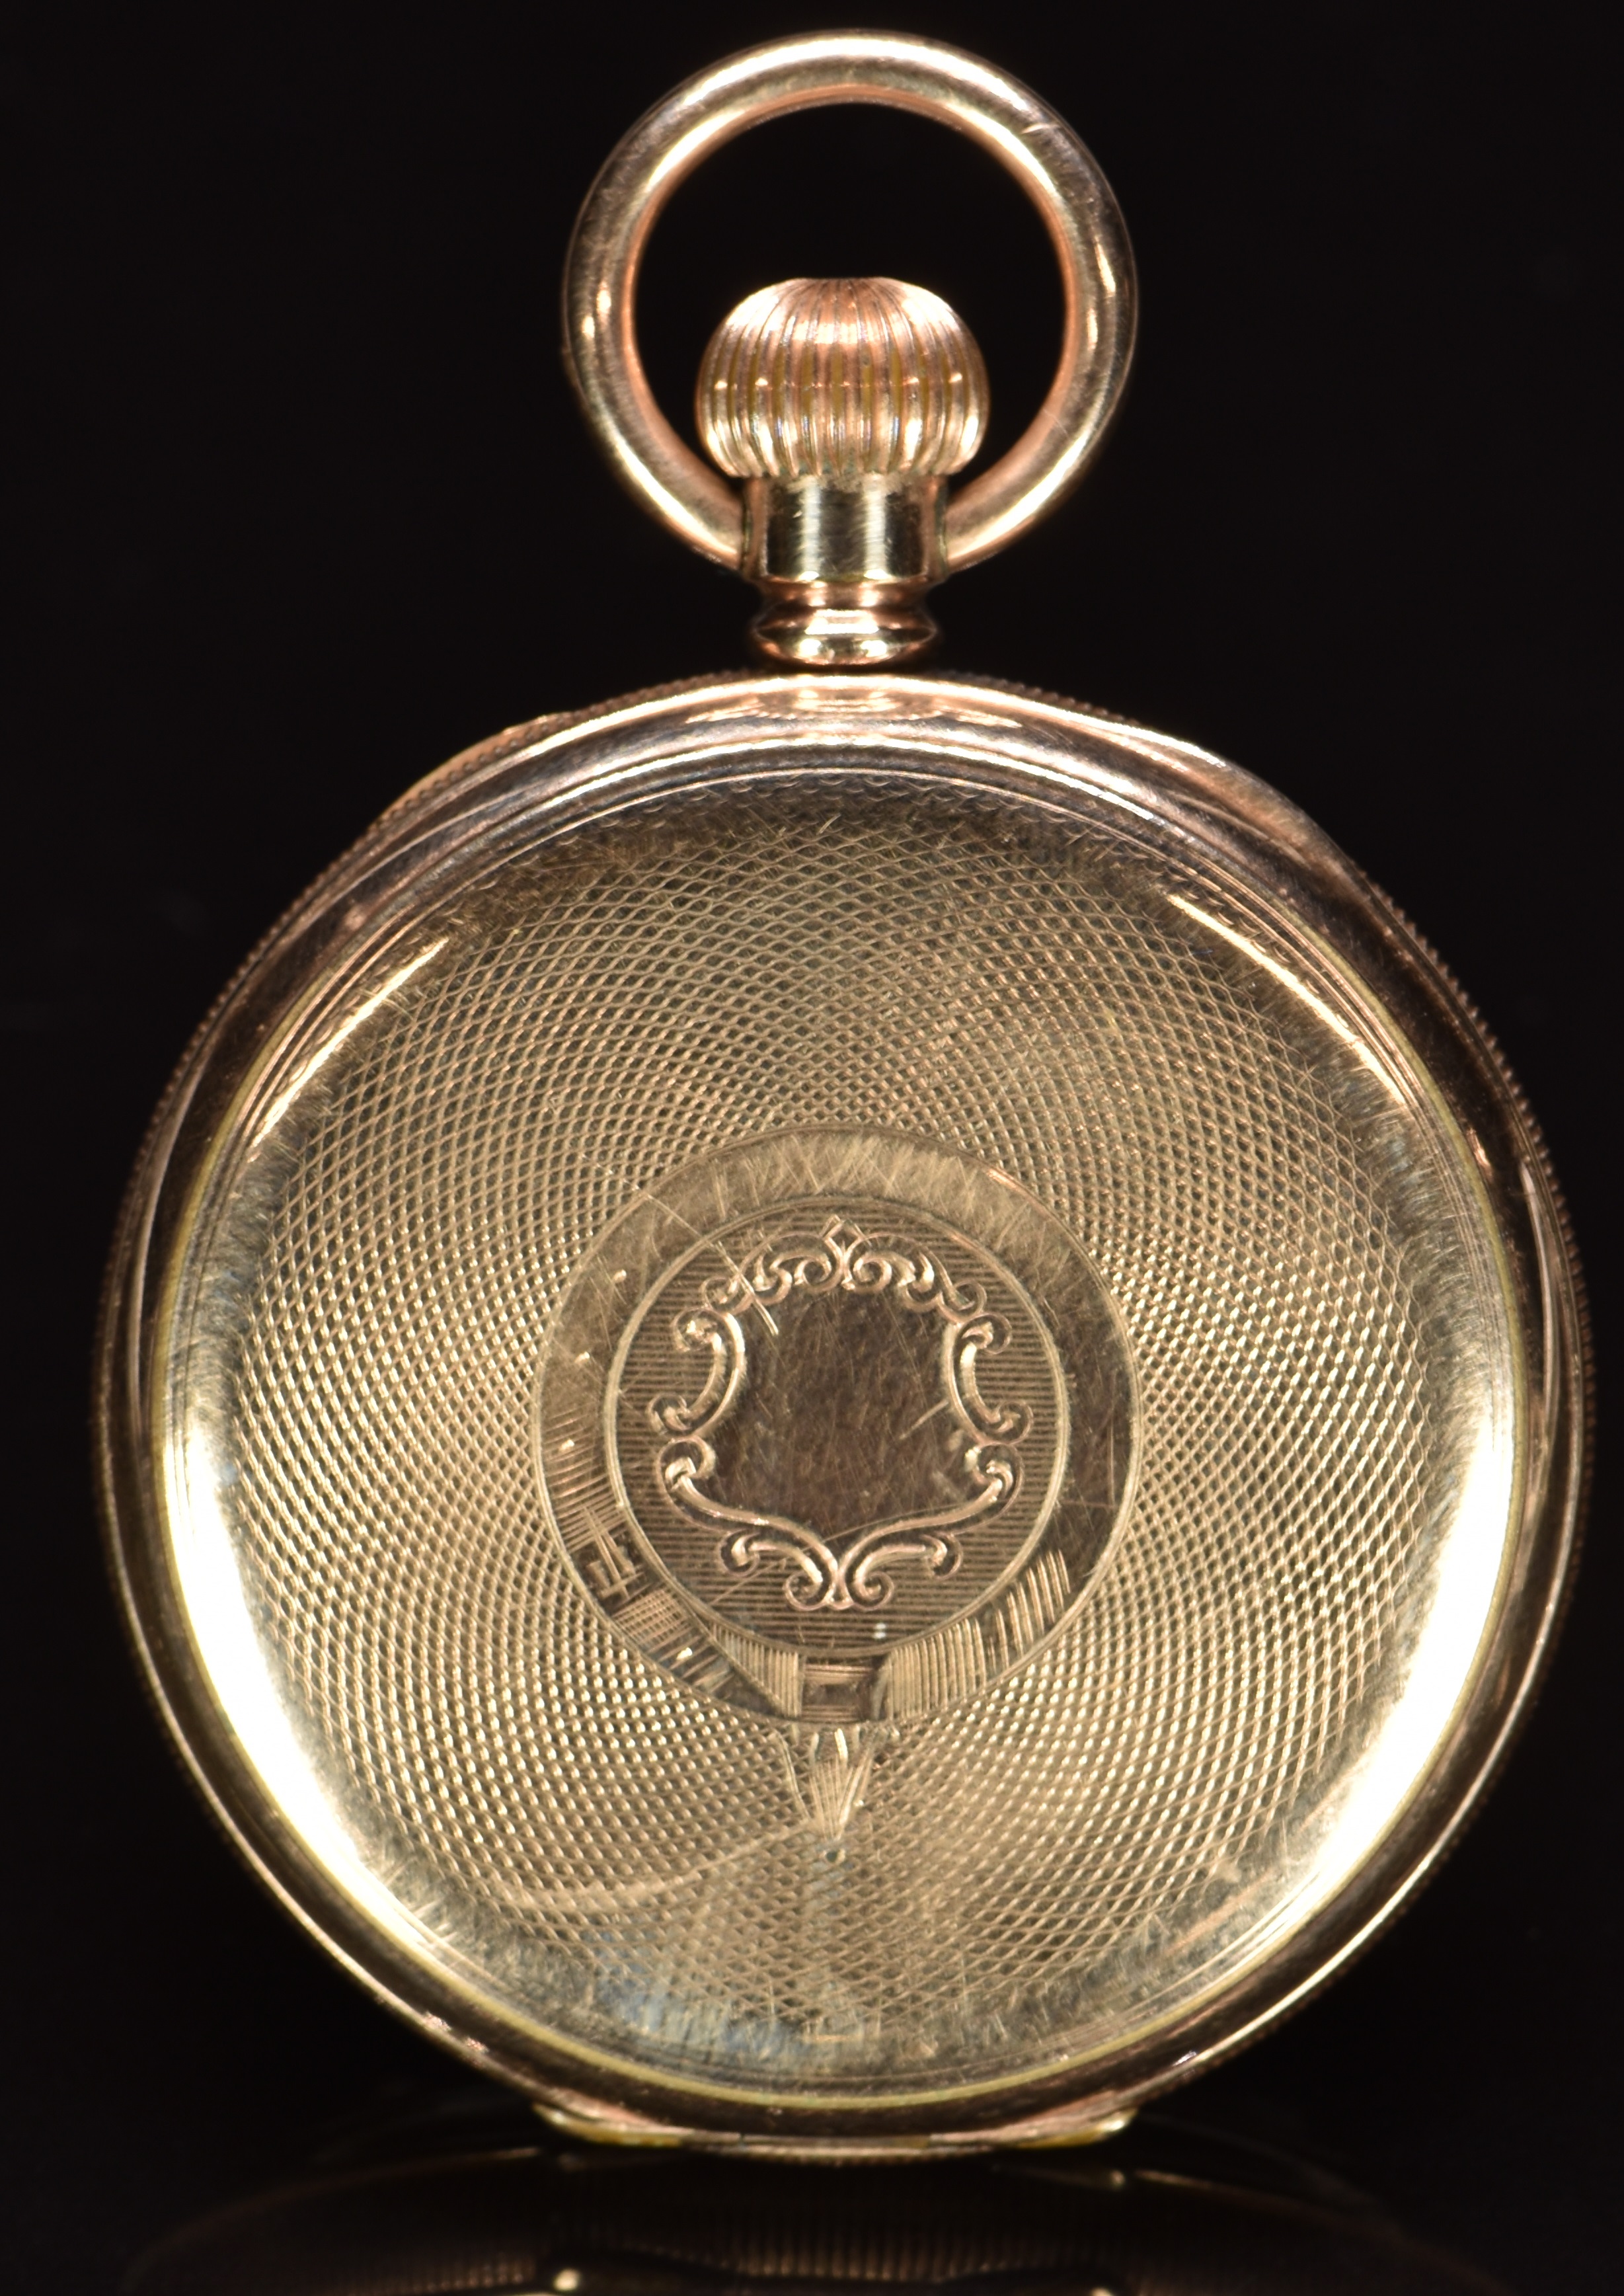 Waltham gold plated keyless winding open faced pocket watch with subsidiary seconds dial, blued - Image 2 of 3